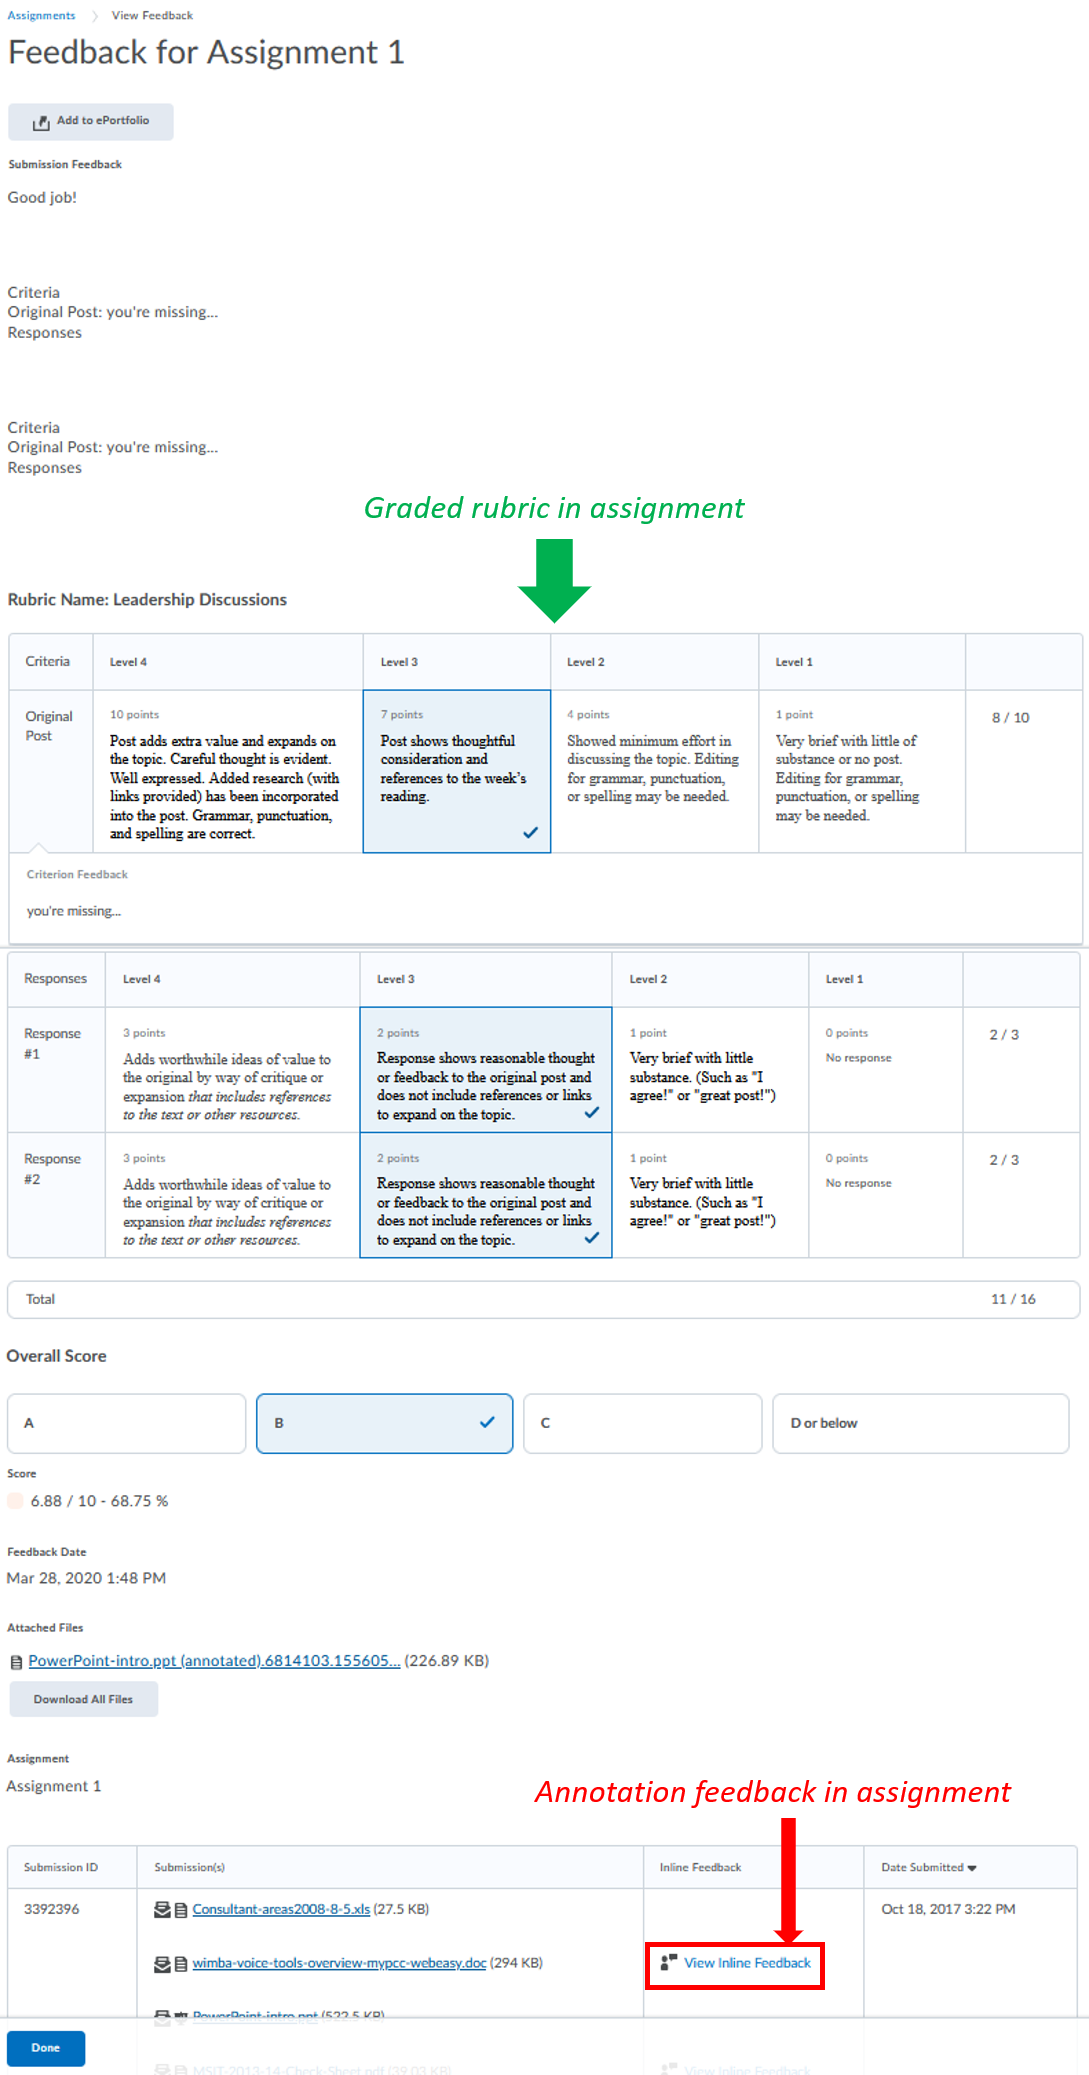 student-view-graded-rubric-annotation-assignment_in Assignments